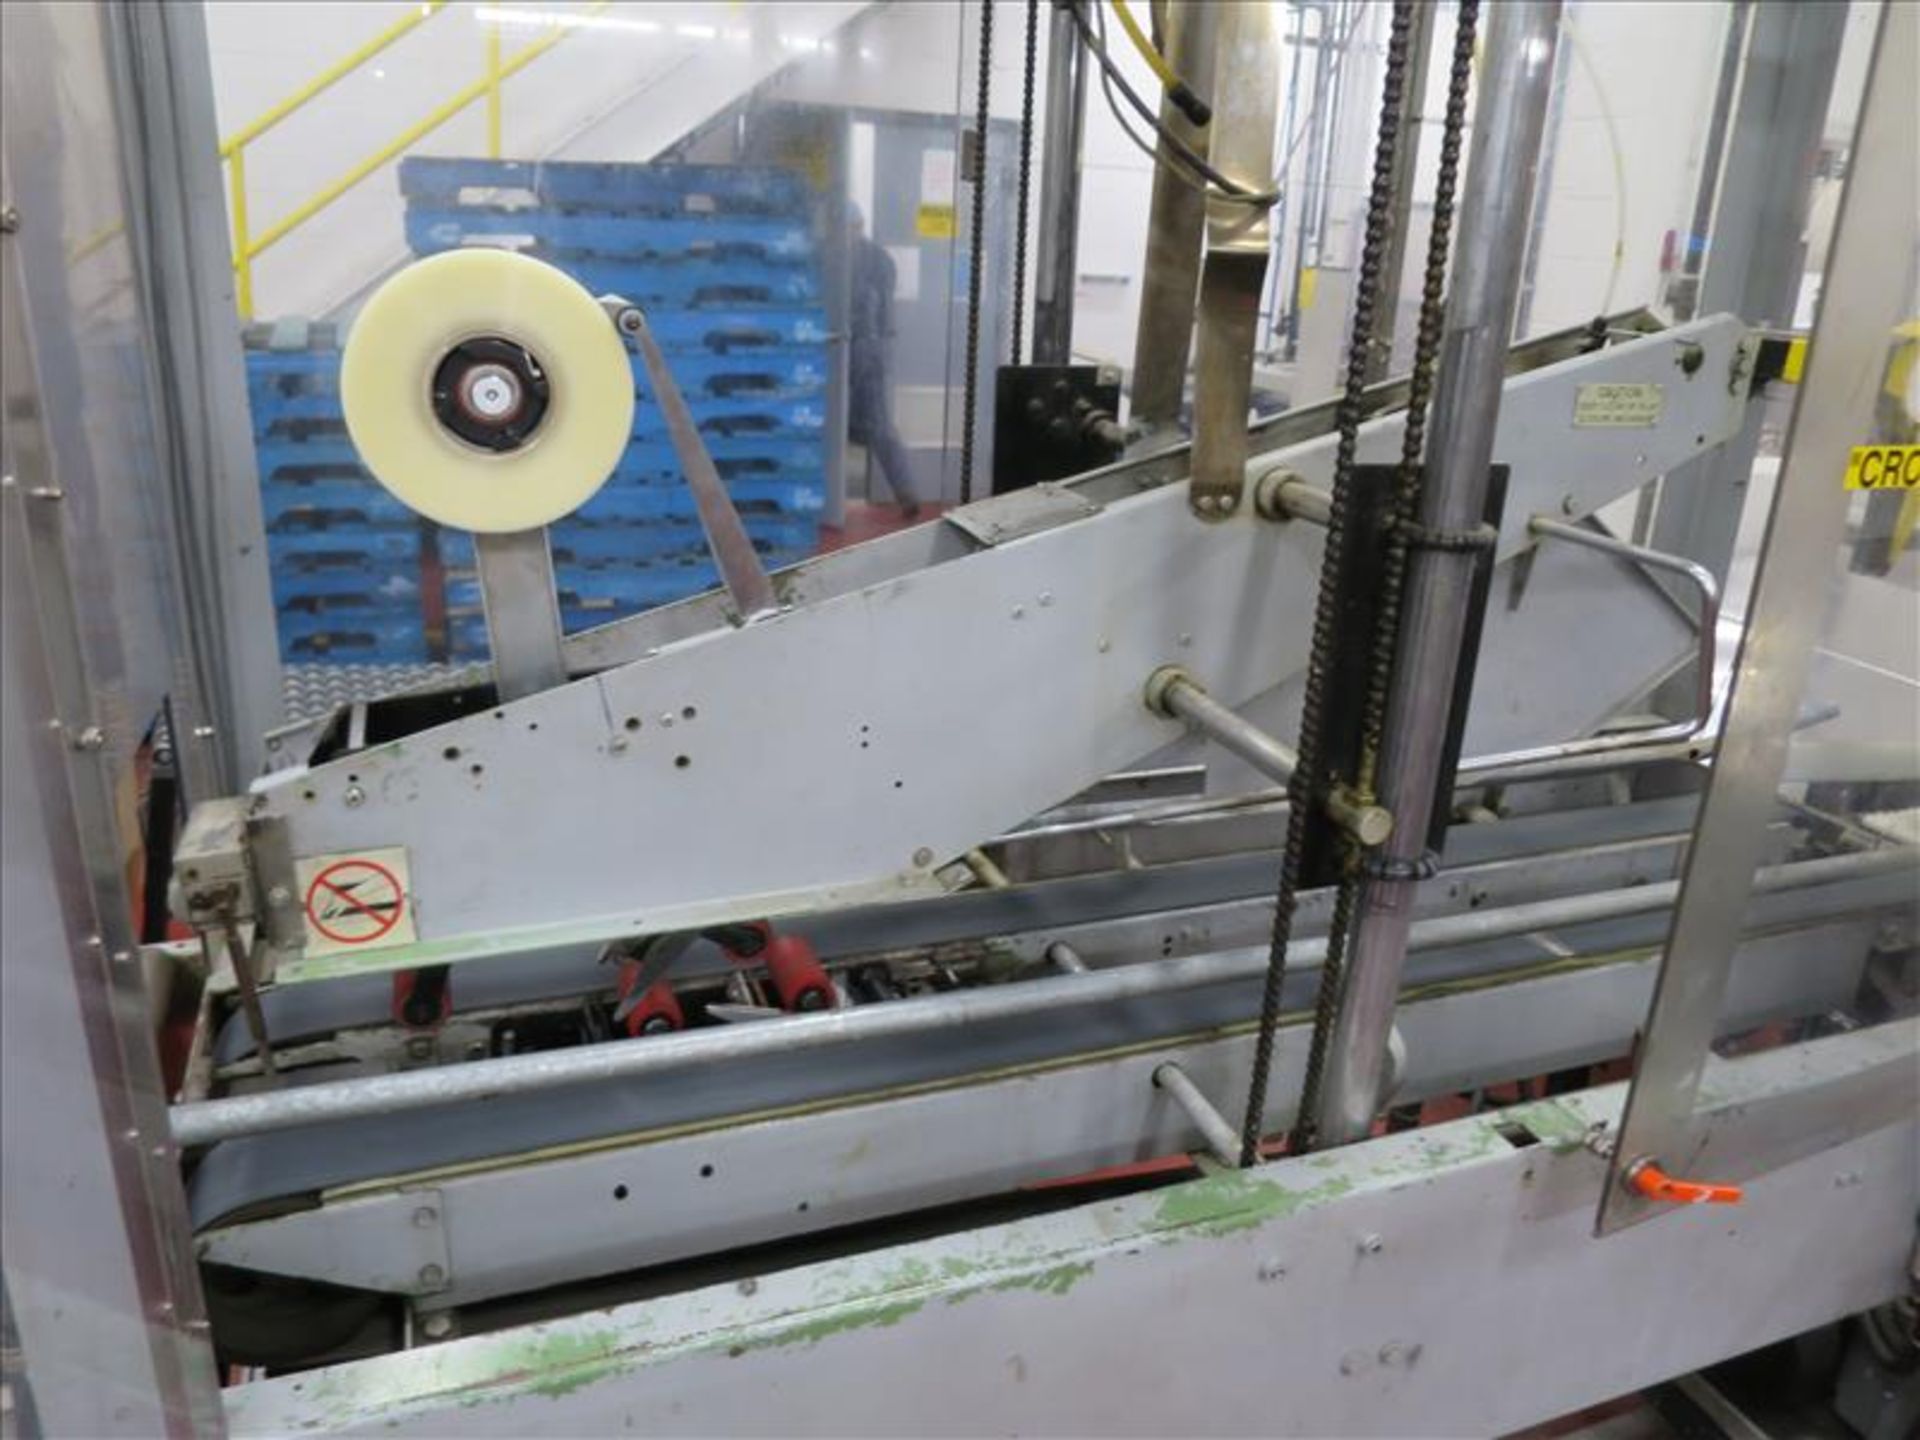 Little David case taping machine, c/w roller conveyor outfeed - Image 2 of 2